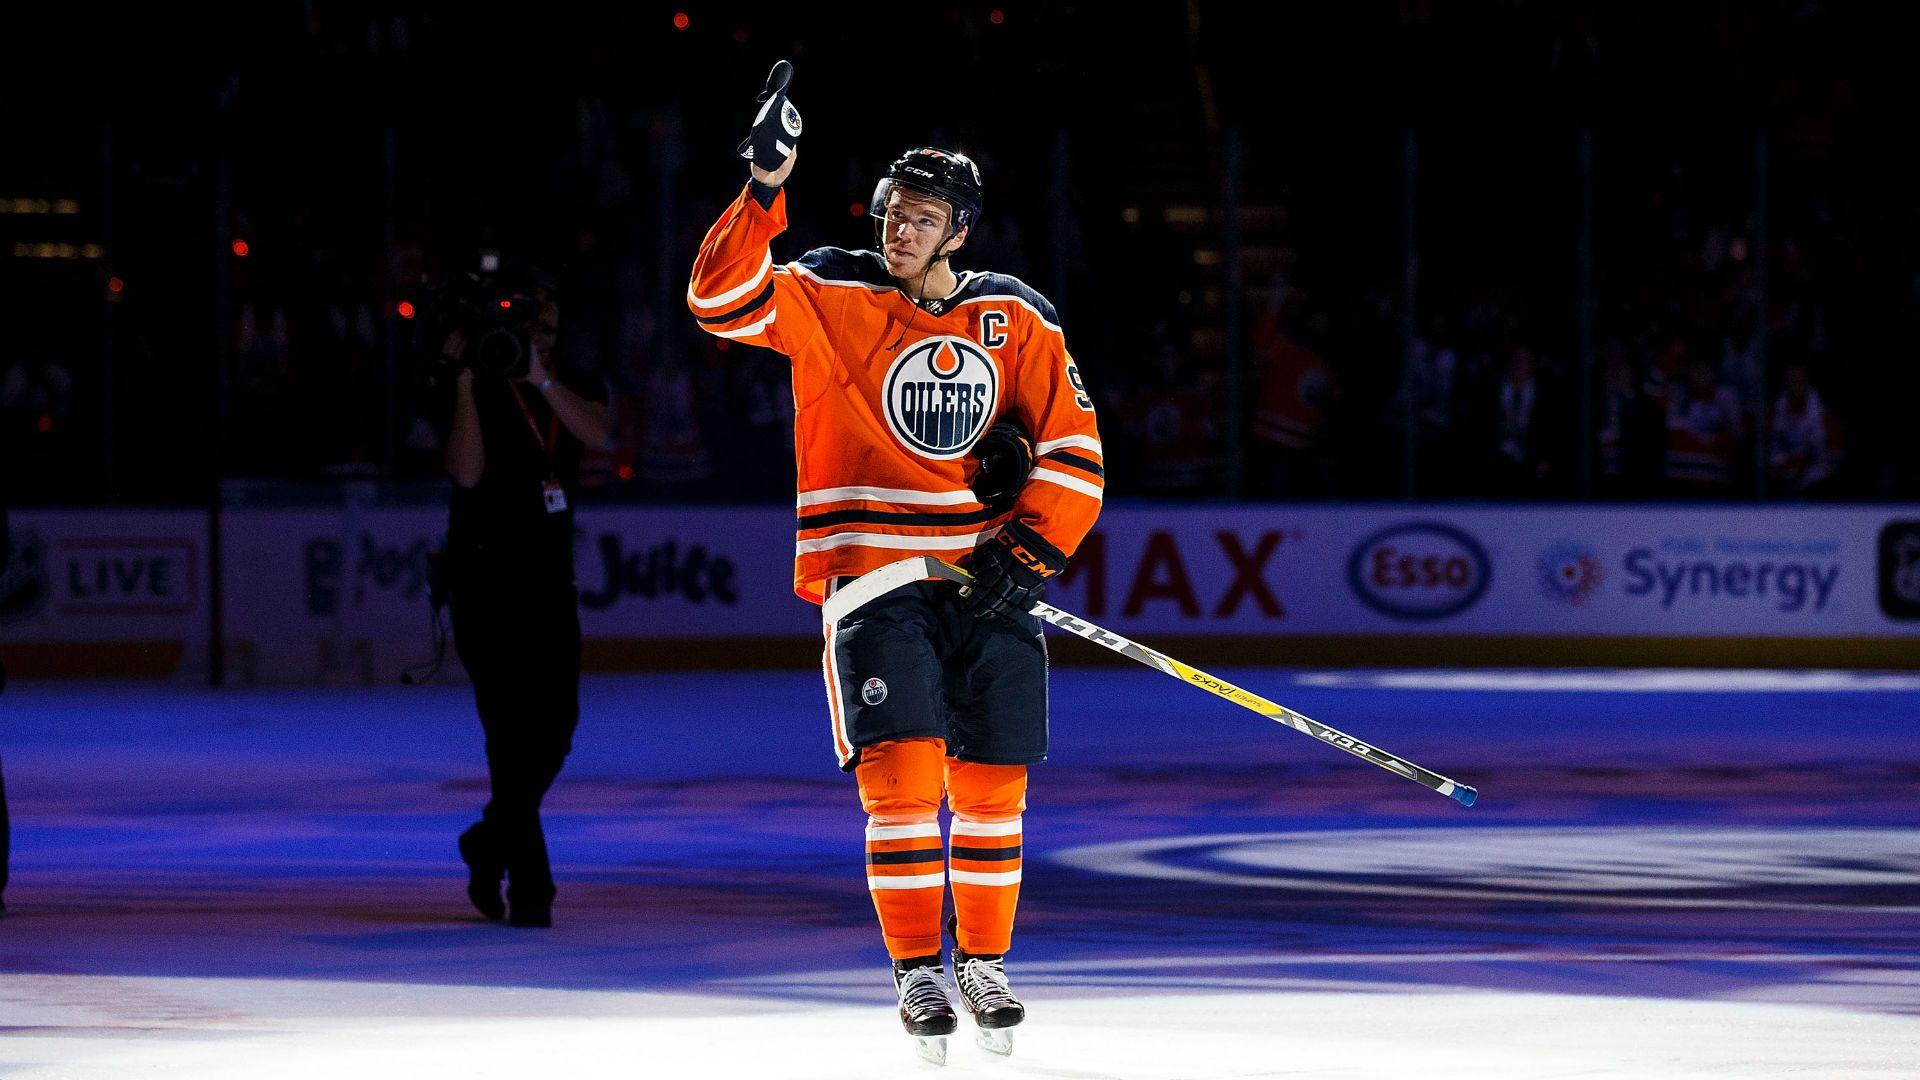 GQ names Oilers' Connor McDavid as one of 'Greatest Athletes